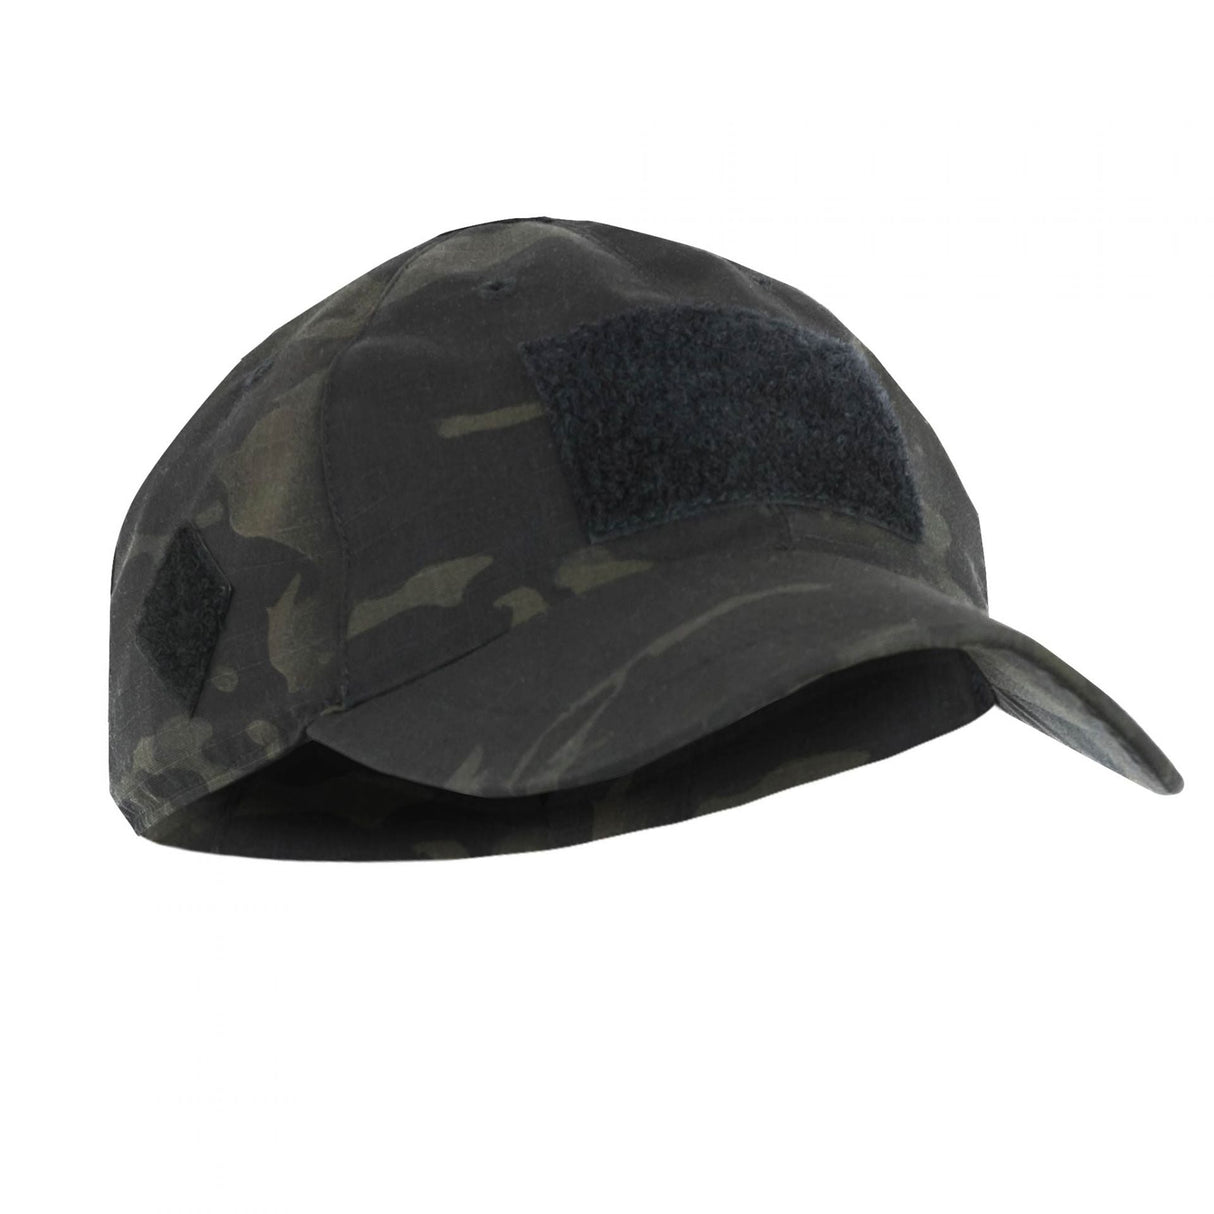 UF PRO Base Cap: Available in Various Colors.